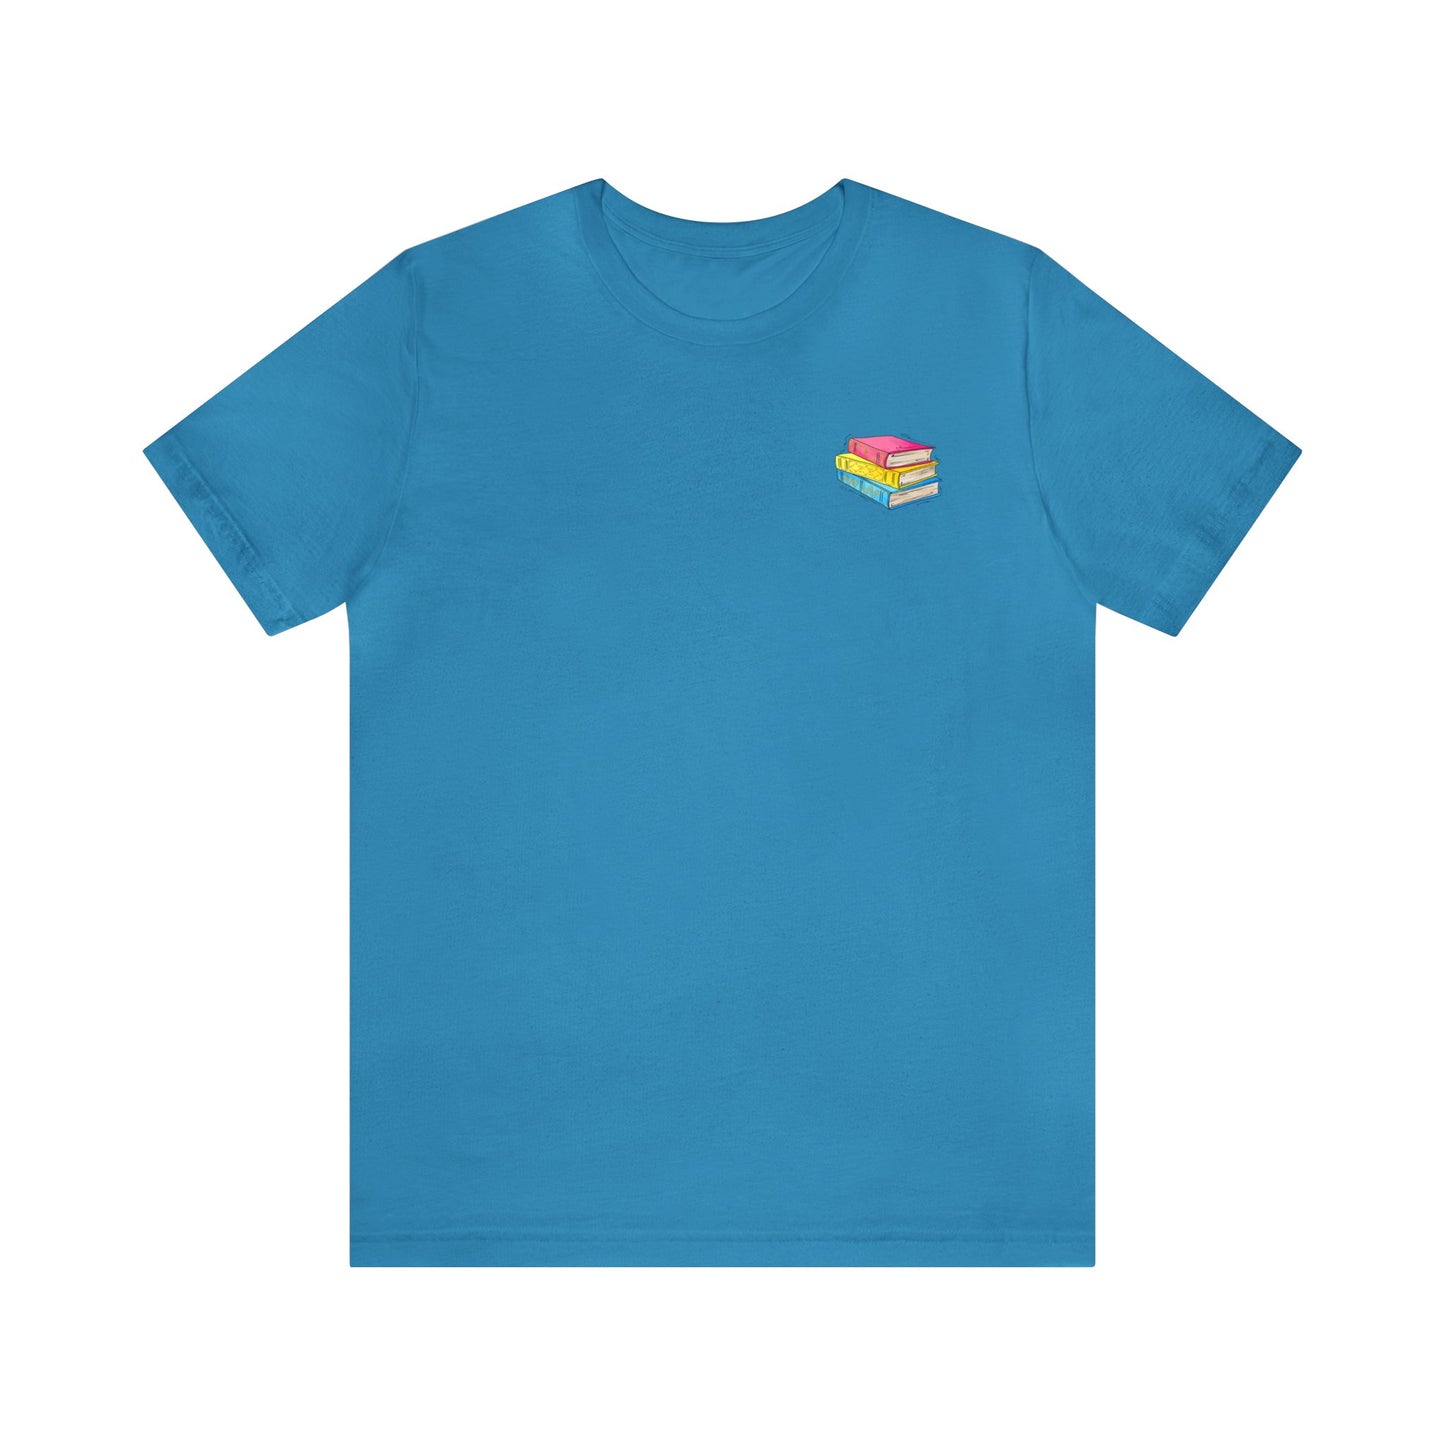 Pansexual Pride Flag Old Books - Unisex T-Shirt